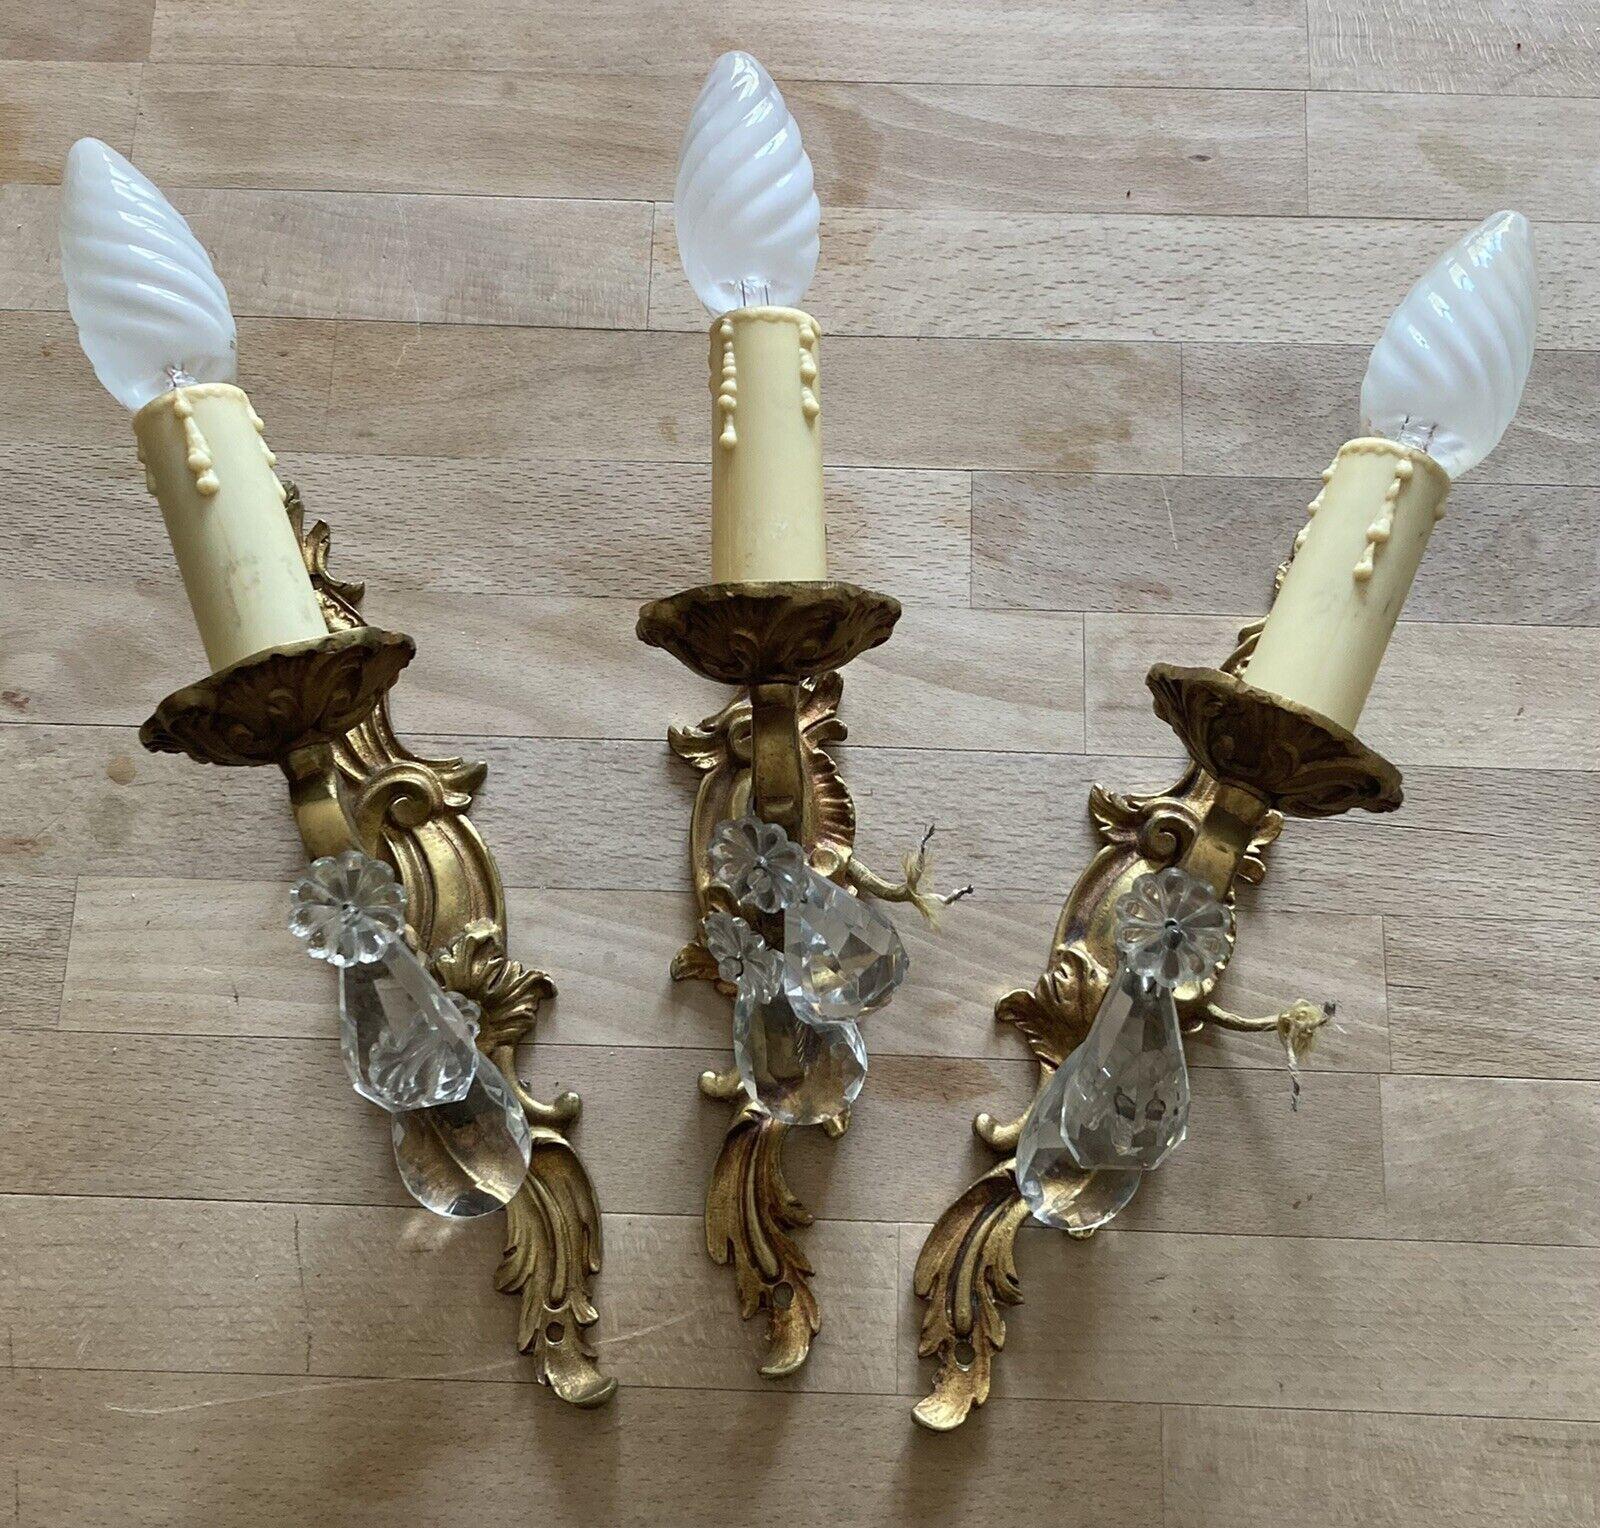 Set of 3 1940's French Louis XVI Rococo style Gilt Bronze Wall Sconces with Cut Crystal. Single bulb on each sconce.